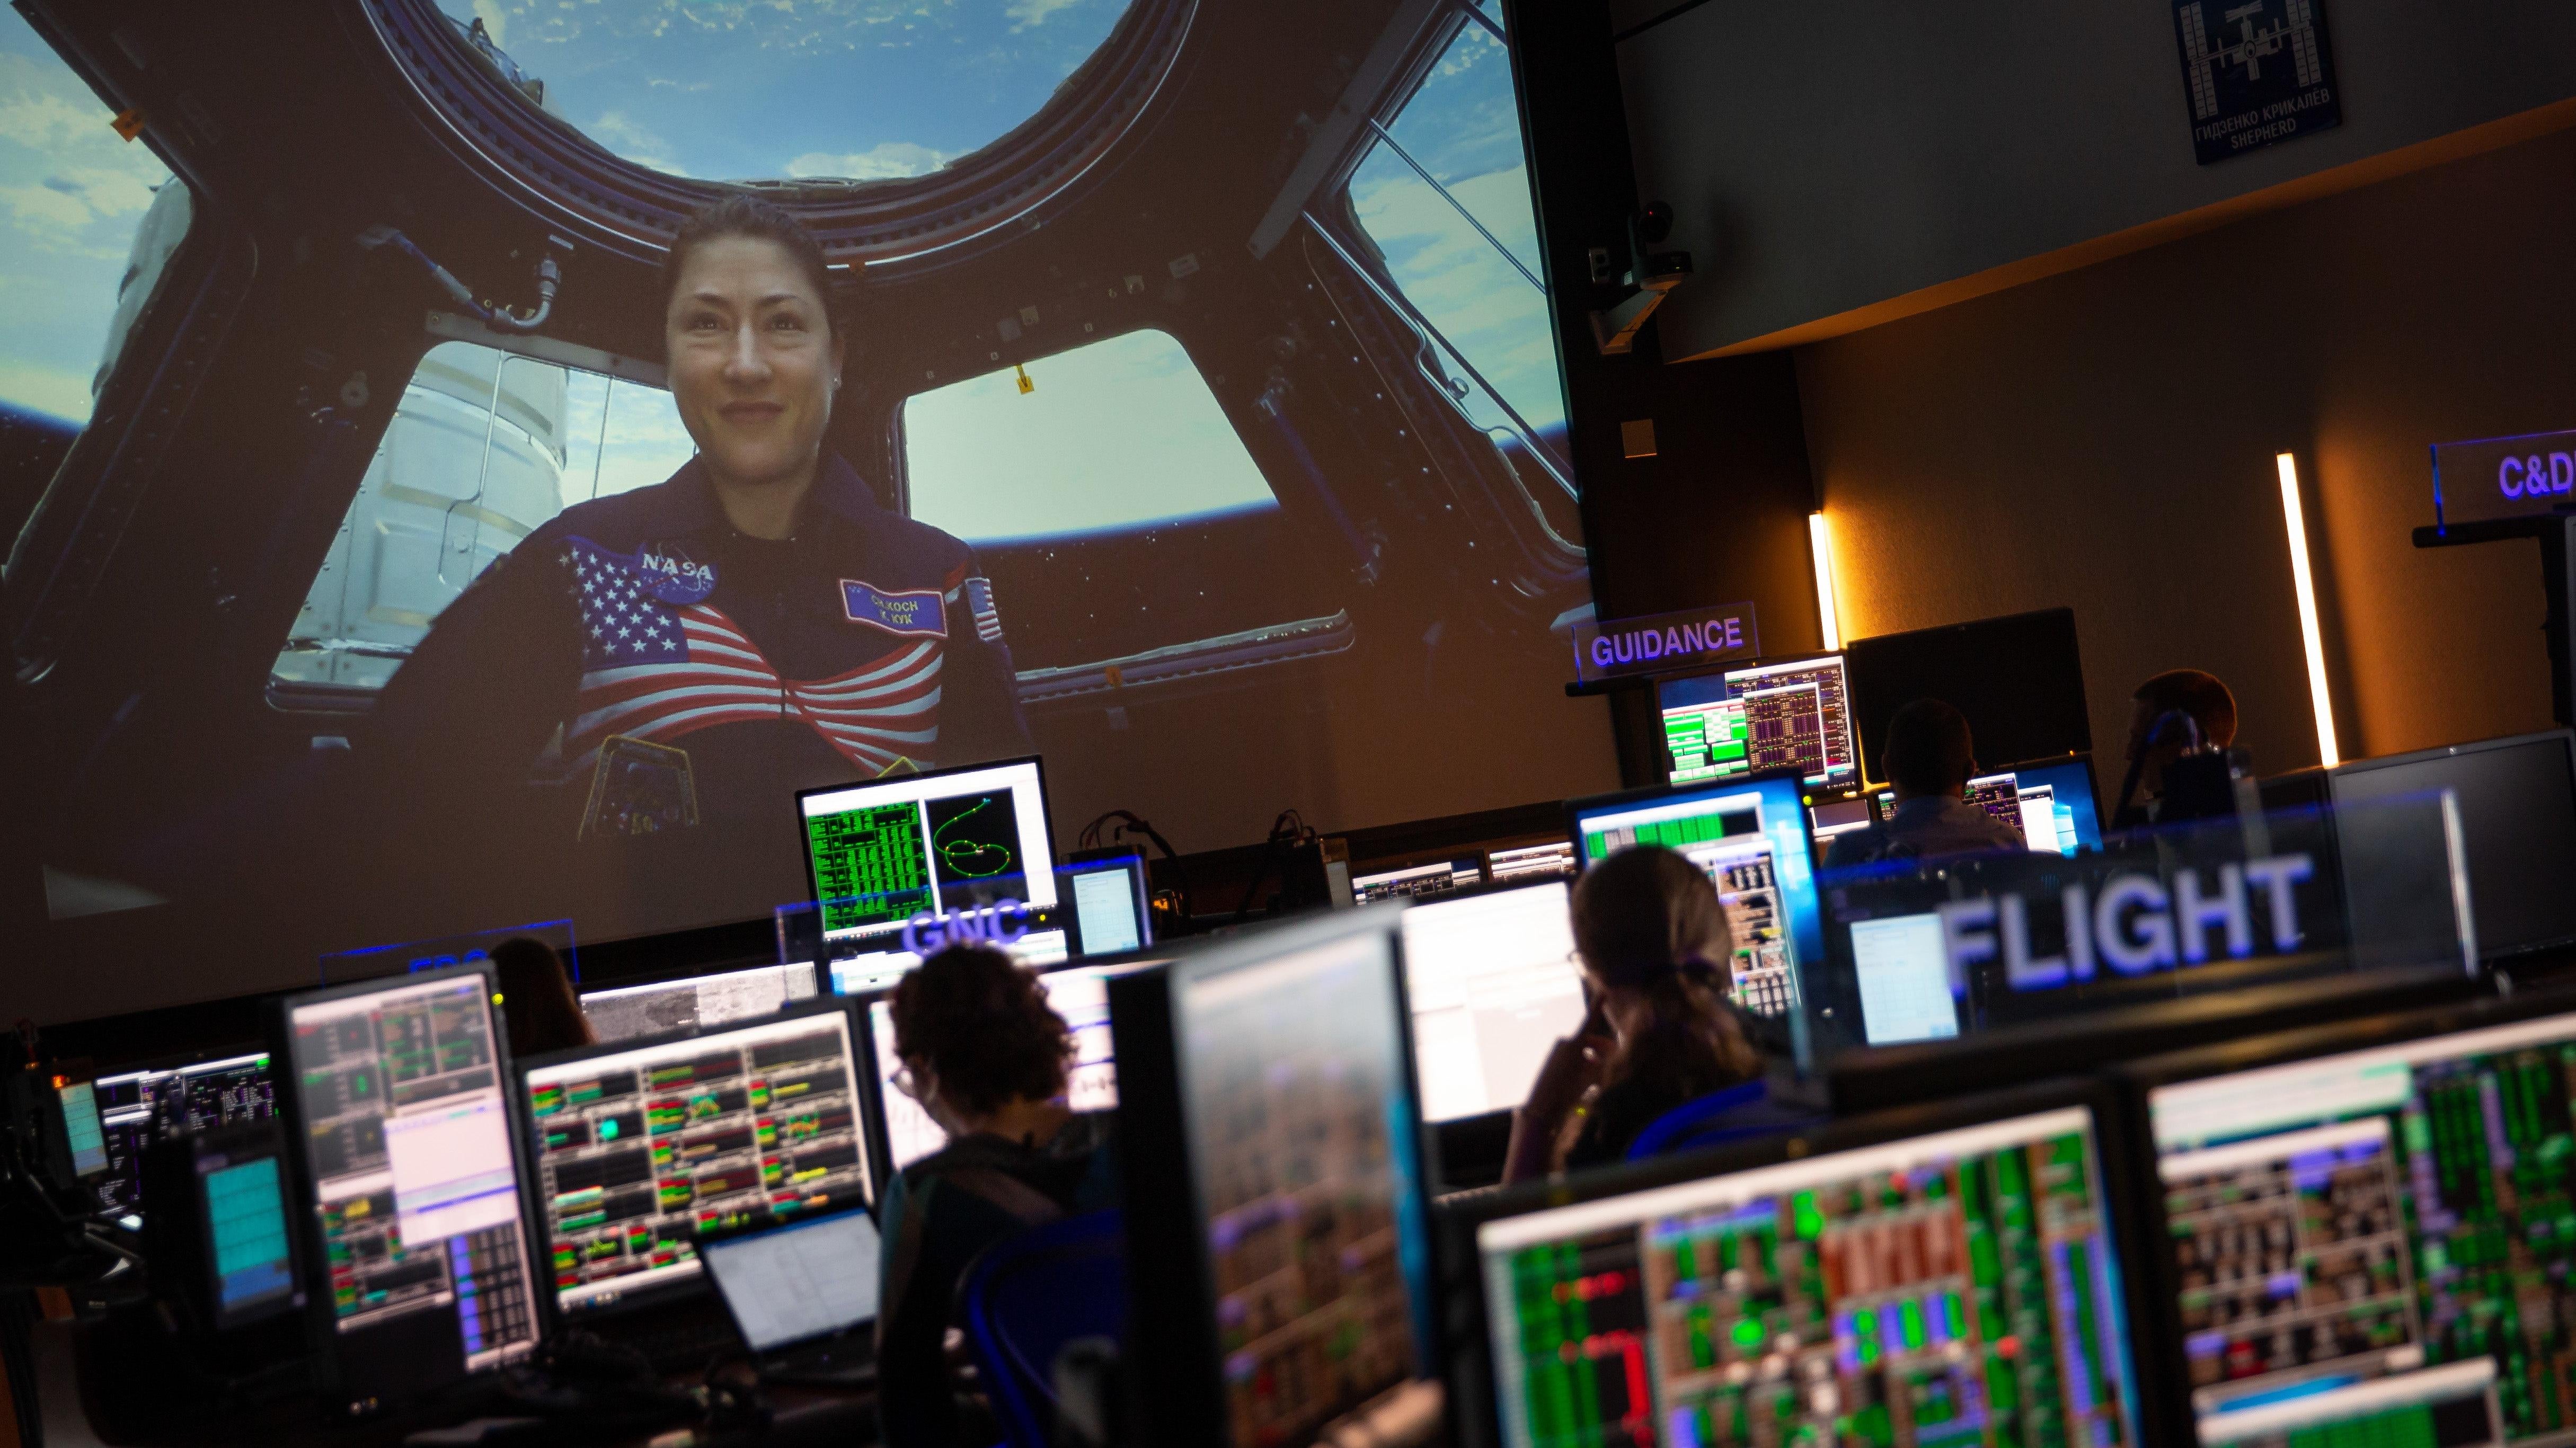 Astronaut Christina Koch is shown on the ISS in 2019. Koch was recently chosen to be the first woman on a Moon mission. (Photo: NASA)